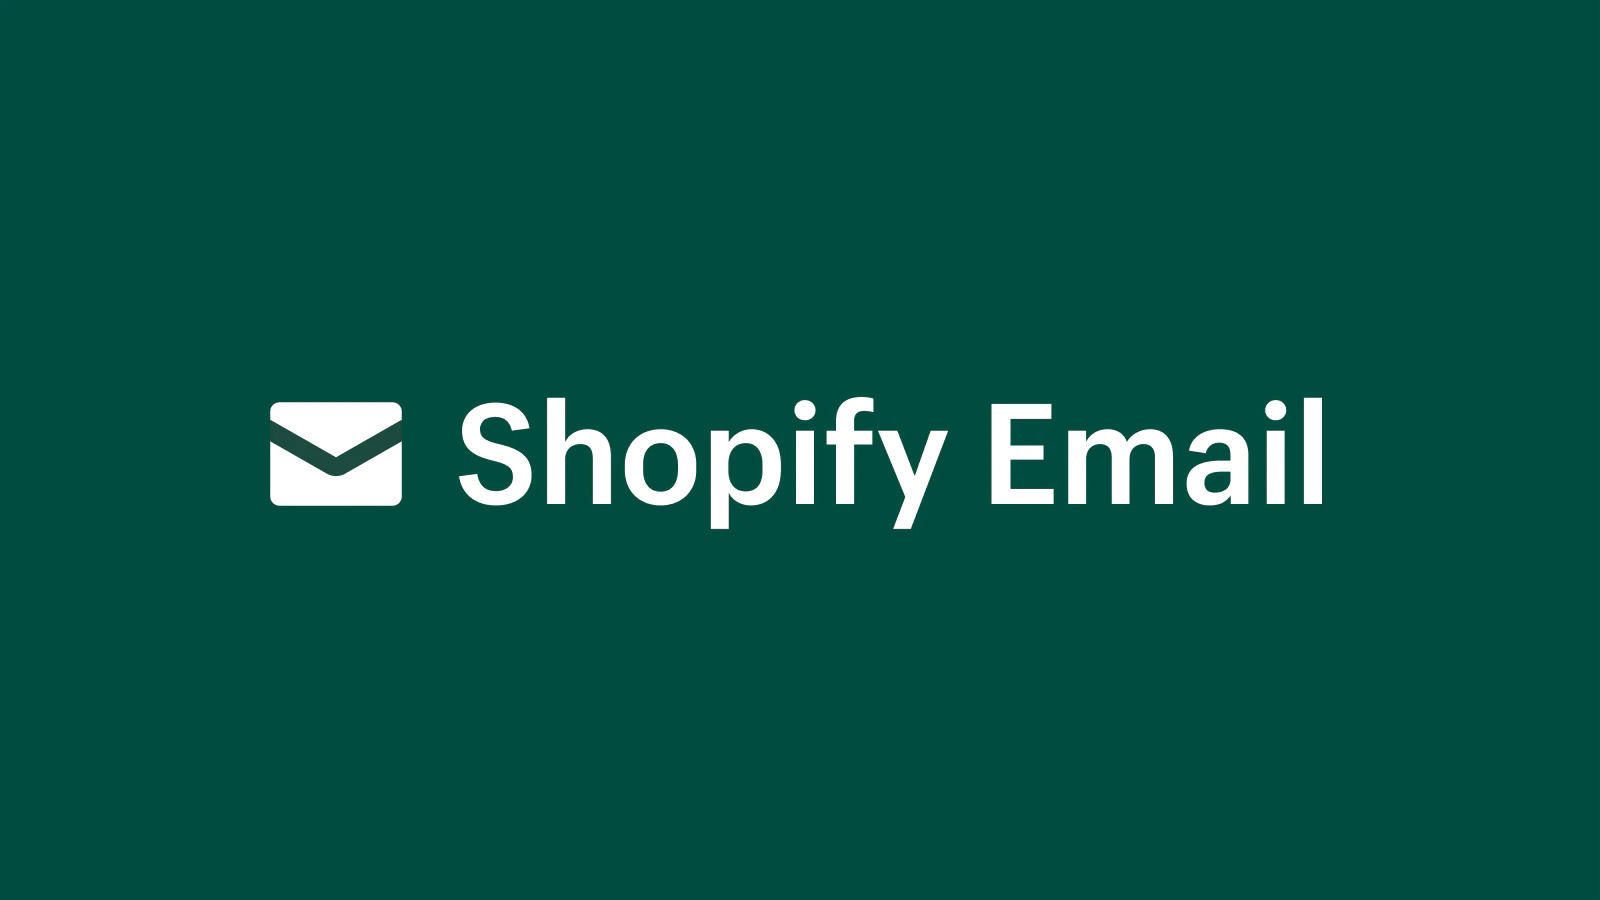 Shopify Email - Email Marketing Made For Commerce